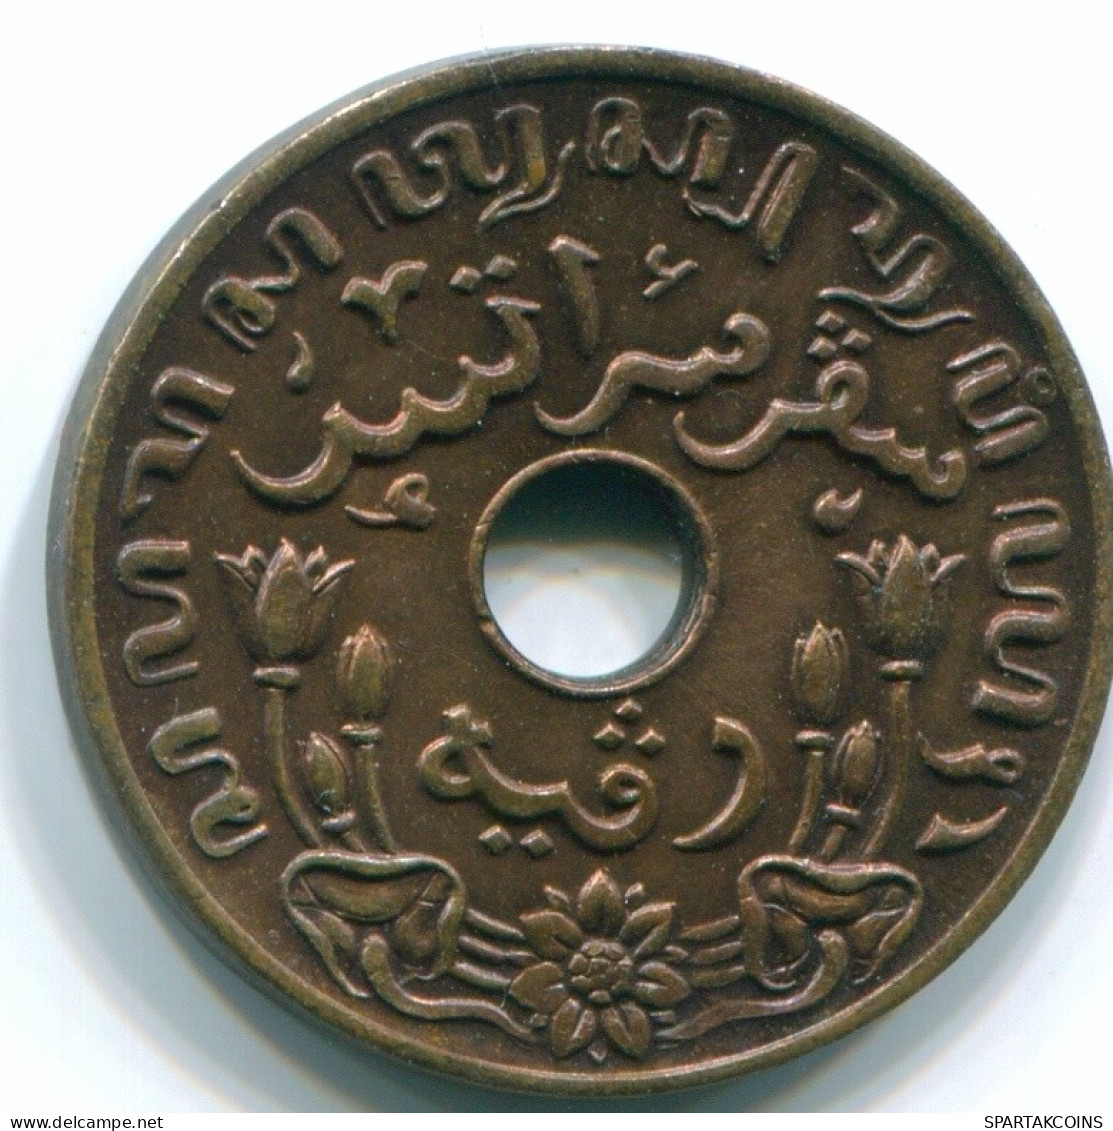 1 CENT 1945 P NETHERLANDS EAST INDIES INDONESIA Bronze Colonial Coin #S10415.U.A - Indes Neerlandesas